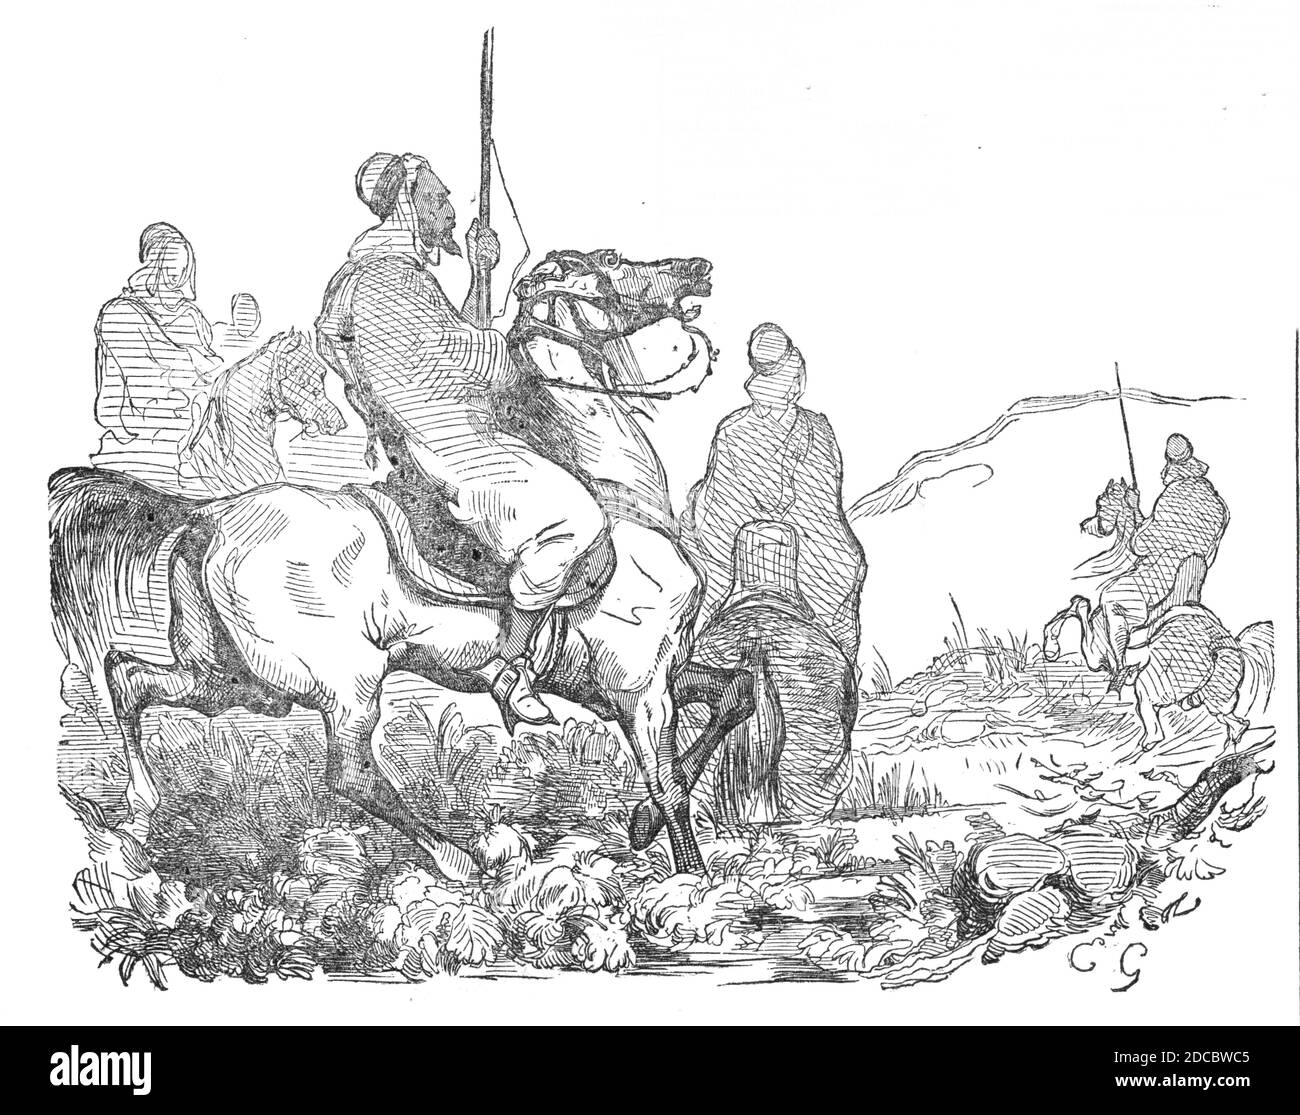 War in Morocco - Arab and Moorish cavalry, 1844. 'The Emperor of Morocco has not a part in his dominions that might not be taken by a frigate and two bomb-vessels in less than four hours. His army is a farce, and their mode of warfare perfectly childish...The ordnance is dangerously useless...the Emperor could at no time gather or hold together 100,000 fighting men, and these comprising a host of such ill-fed, ill-clothed, ill-armed ragamuffins...From their bigoted habit of excluding from their country all Europeans, and from the little experience they have gathered of European war tactics, it Stock Photo